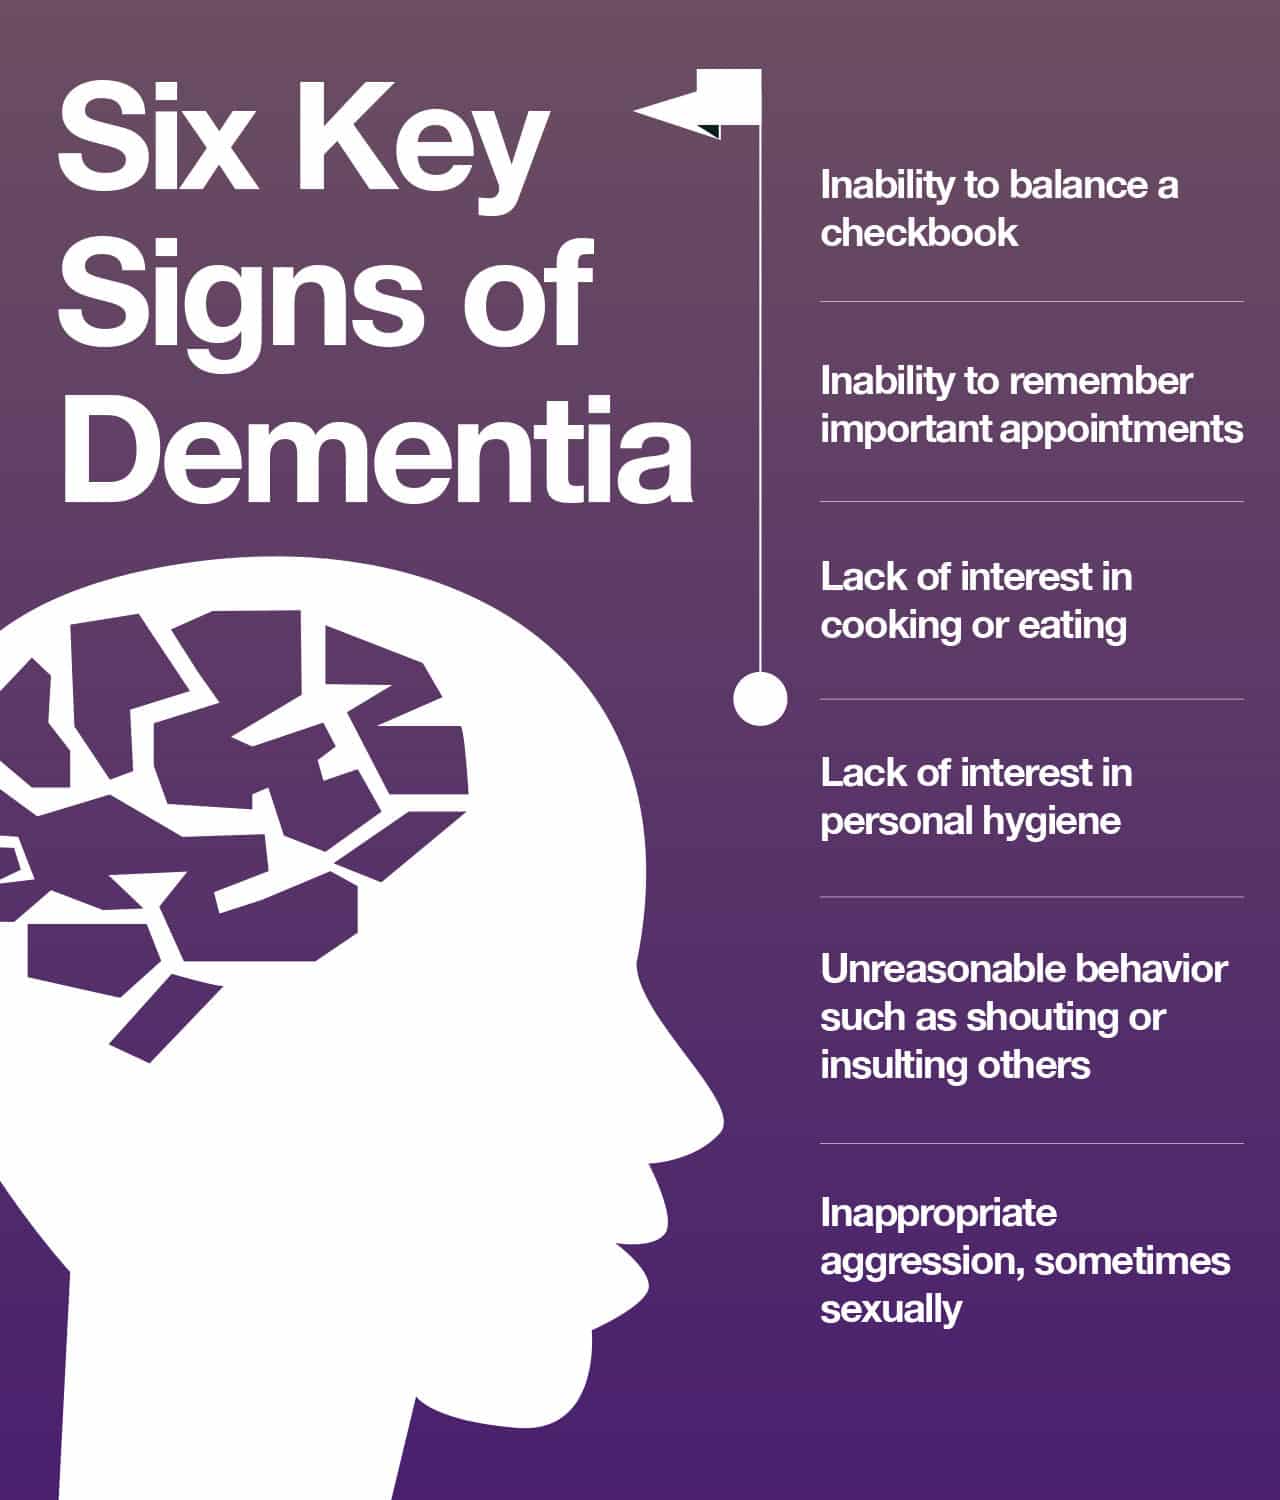 What Research Tells Us About Dementia: Overview